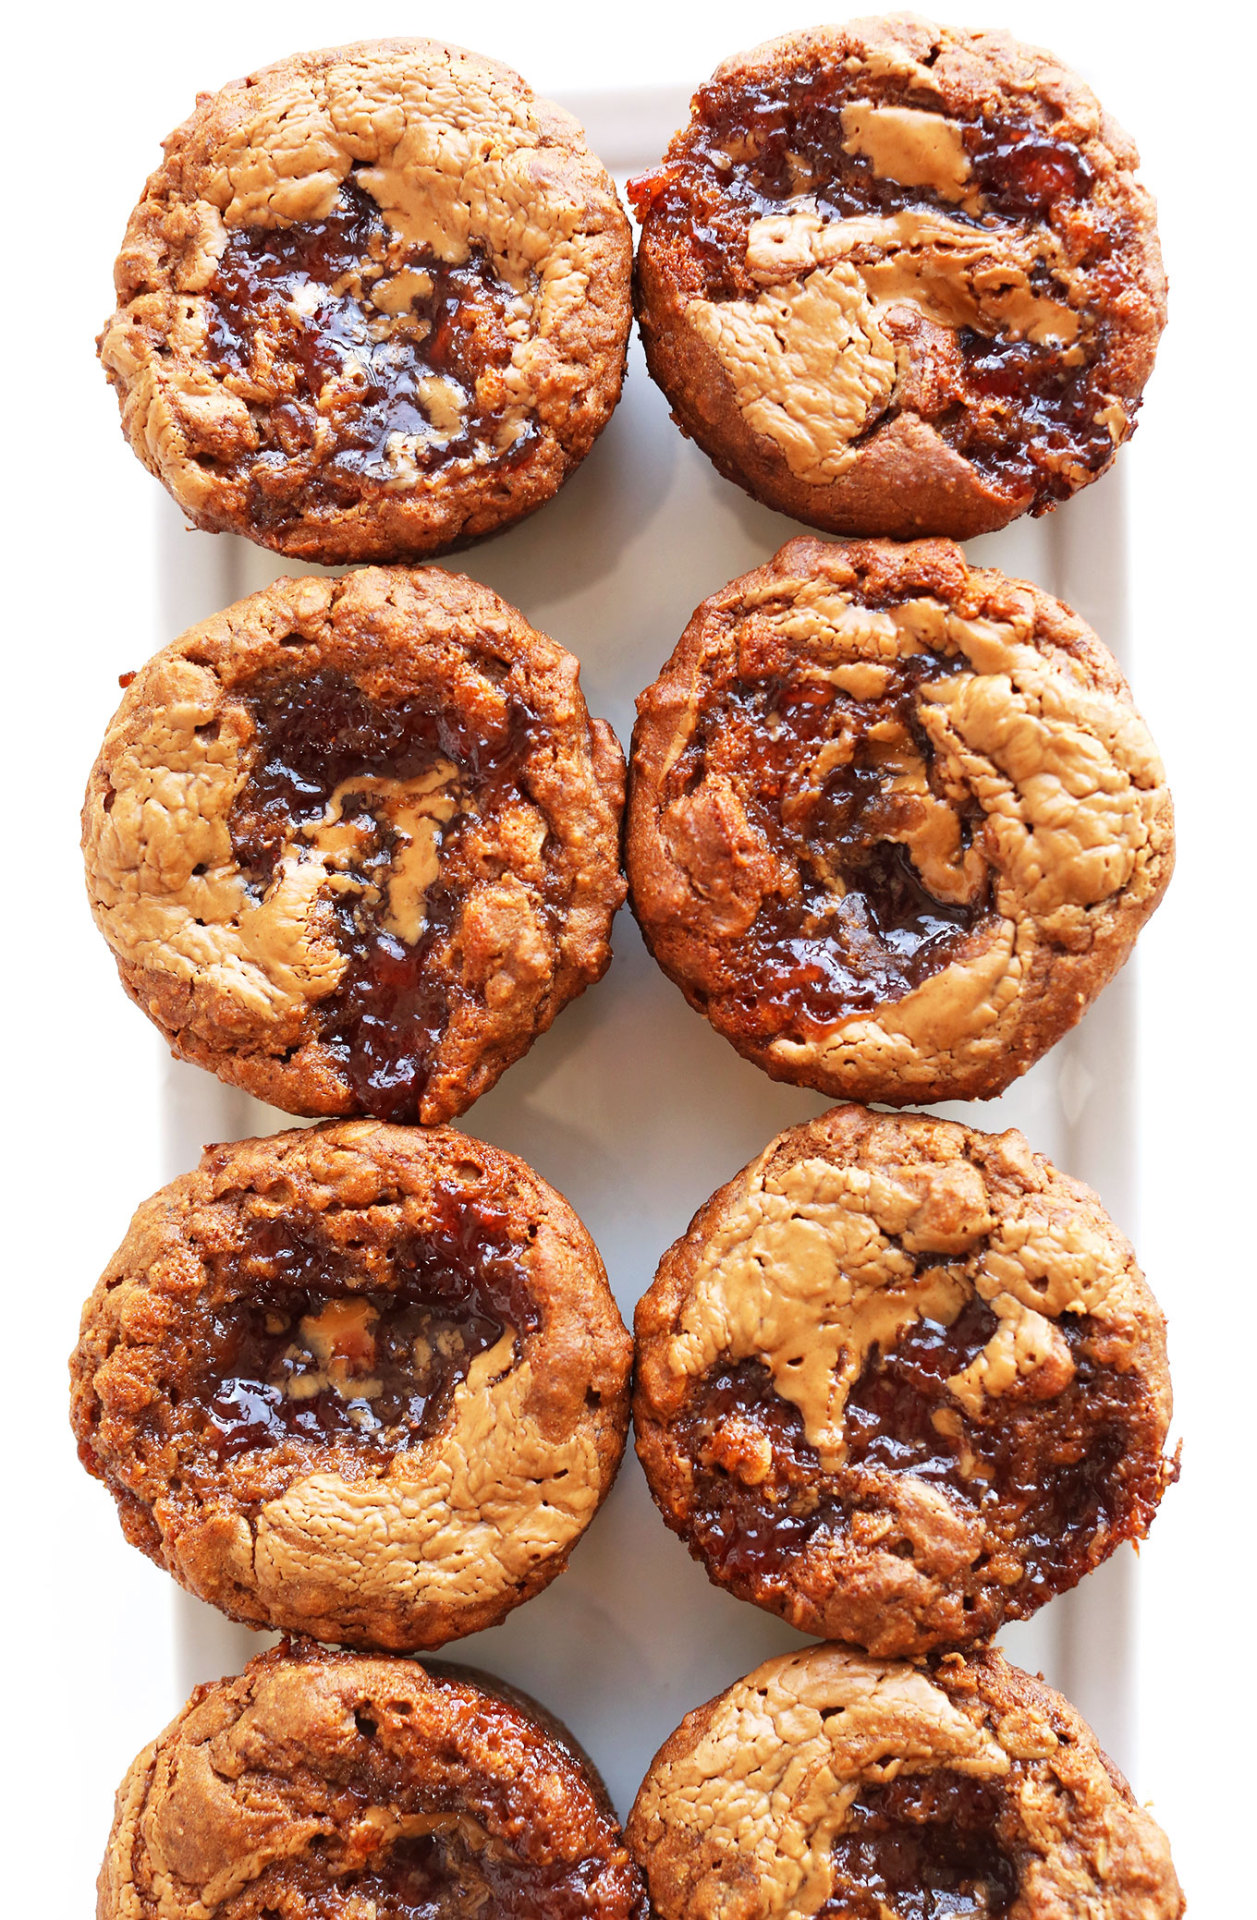 This is my everything.Peanut Butter and Jelly Muffins (Vegan & Gluten-free) via Minimalist Baker